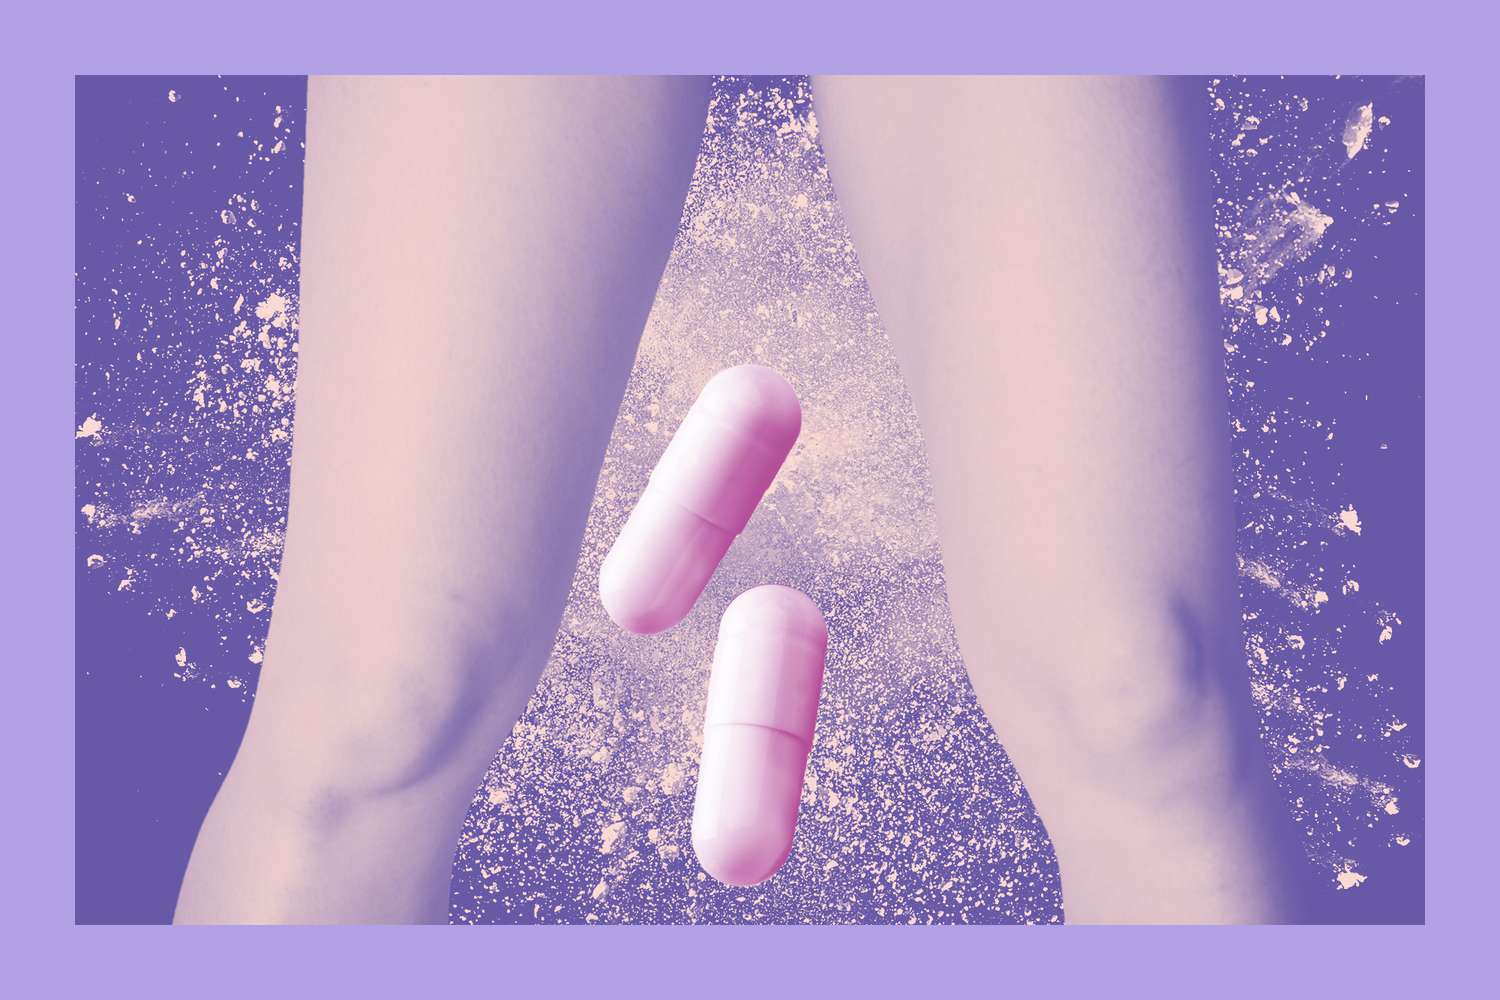 boric acid , Ob-Gyns Want You to Think Twice Before Using This Home Remedy for Yeast Infections